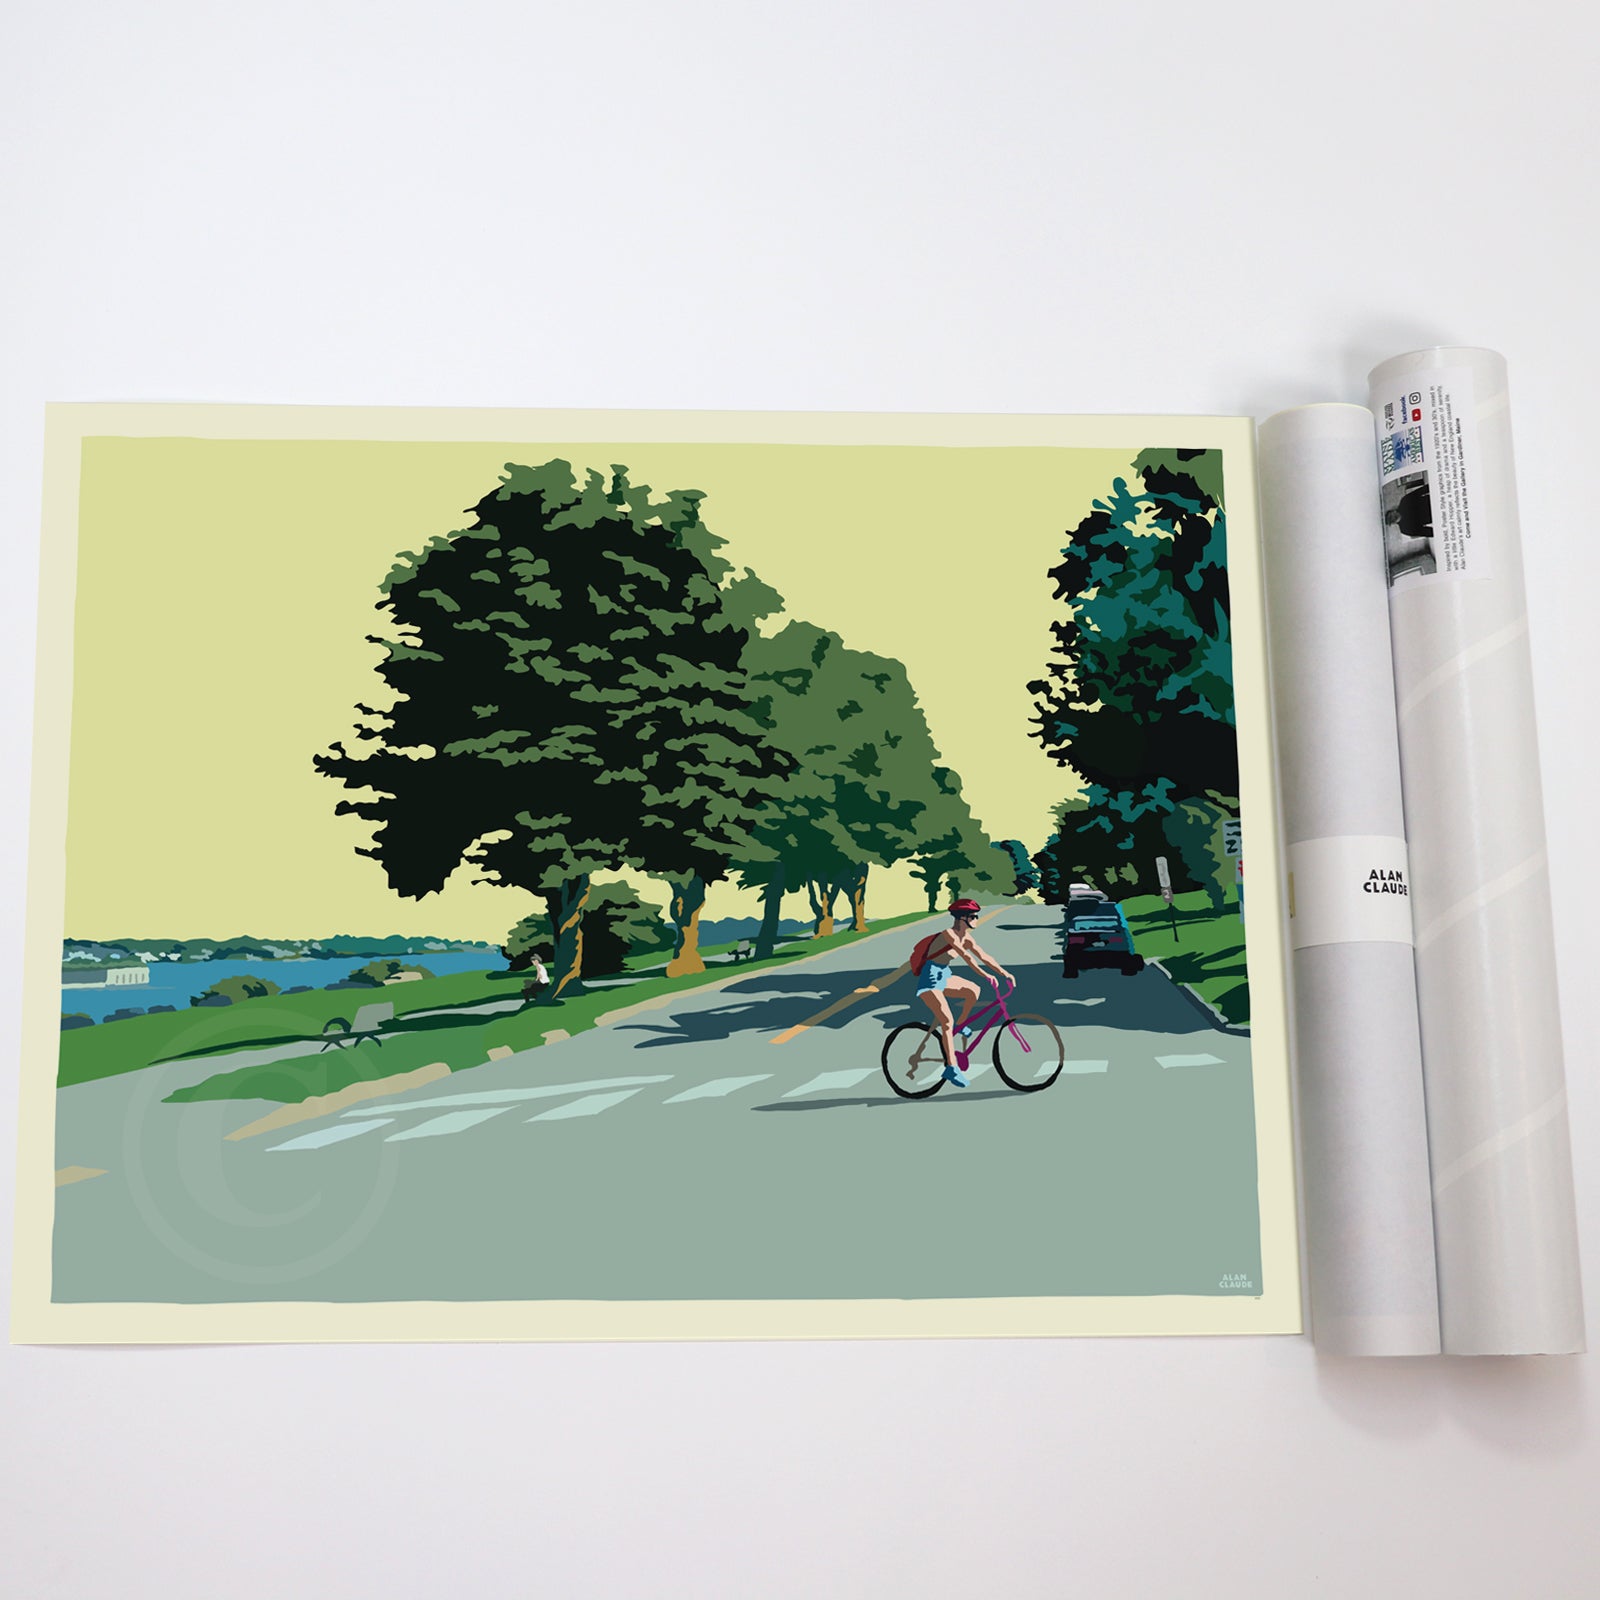 Eastern Promenade Afternoon Art Print 18" x 24" Wall Poster By Alan Claude - Maine